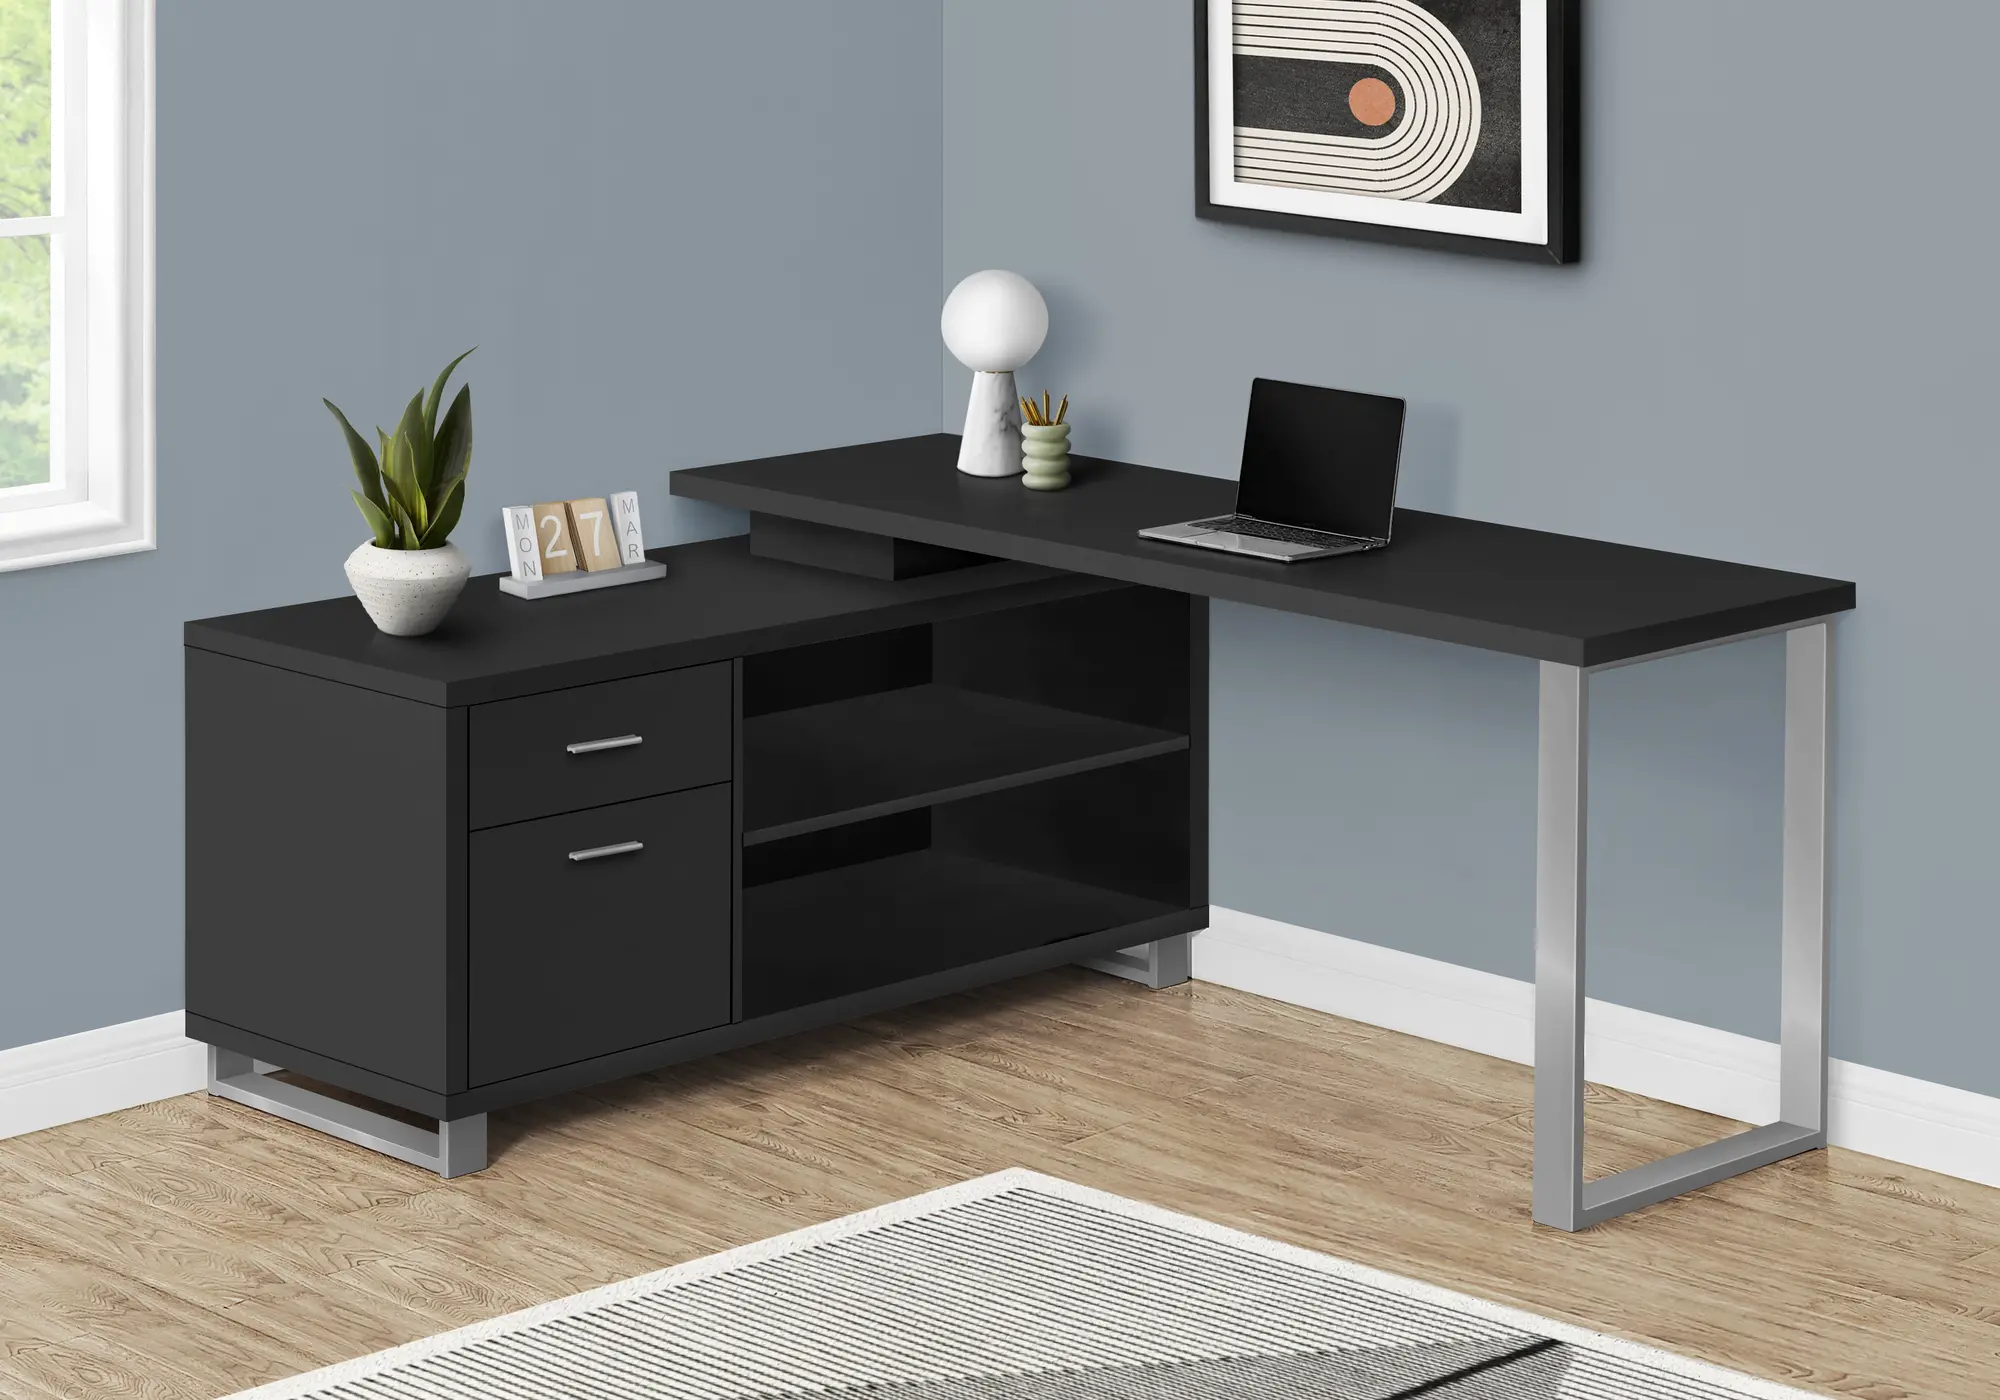 https://static.rcwilley.com/products/112698379/Monarch-Black-72-L-Shaped-Computer-Desk-rcwilley-image1.webp